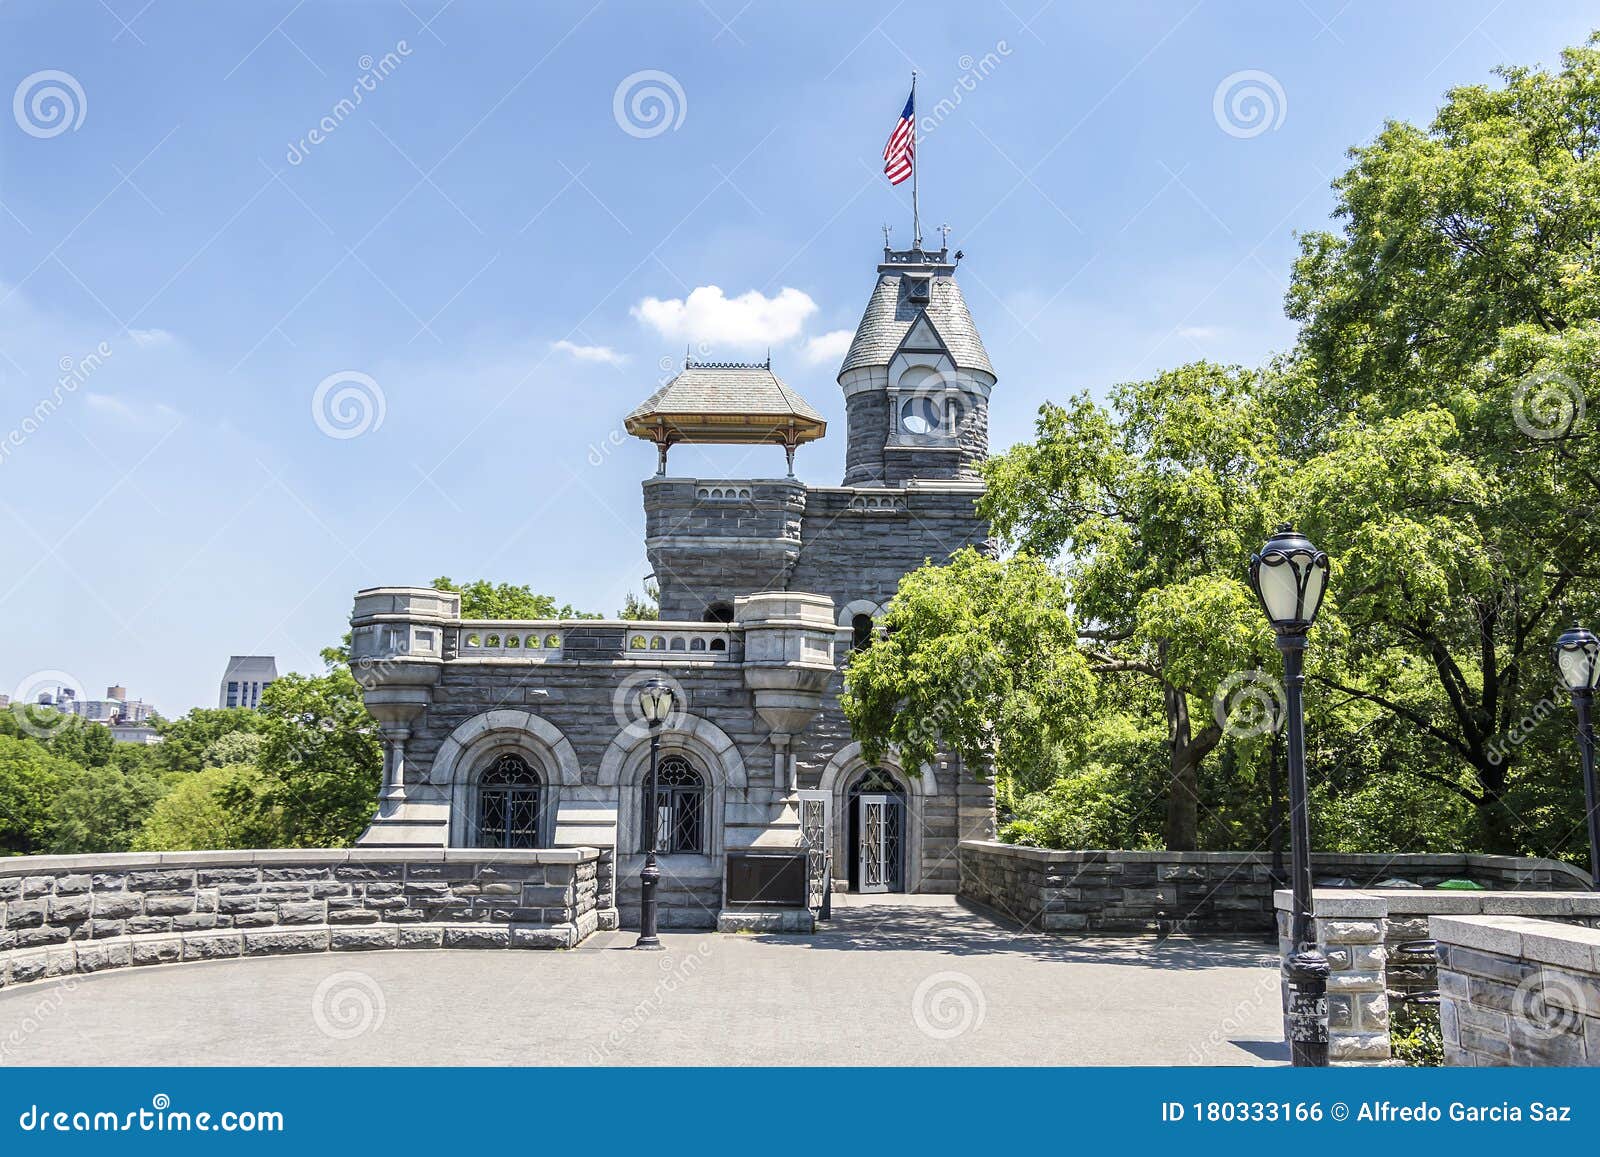 The Belvedere Castle in Central Park Stock Photo - Image of foliage ...